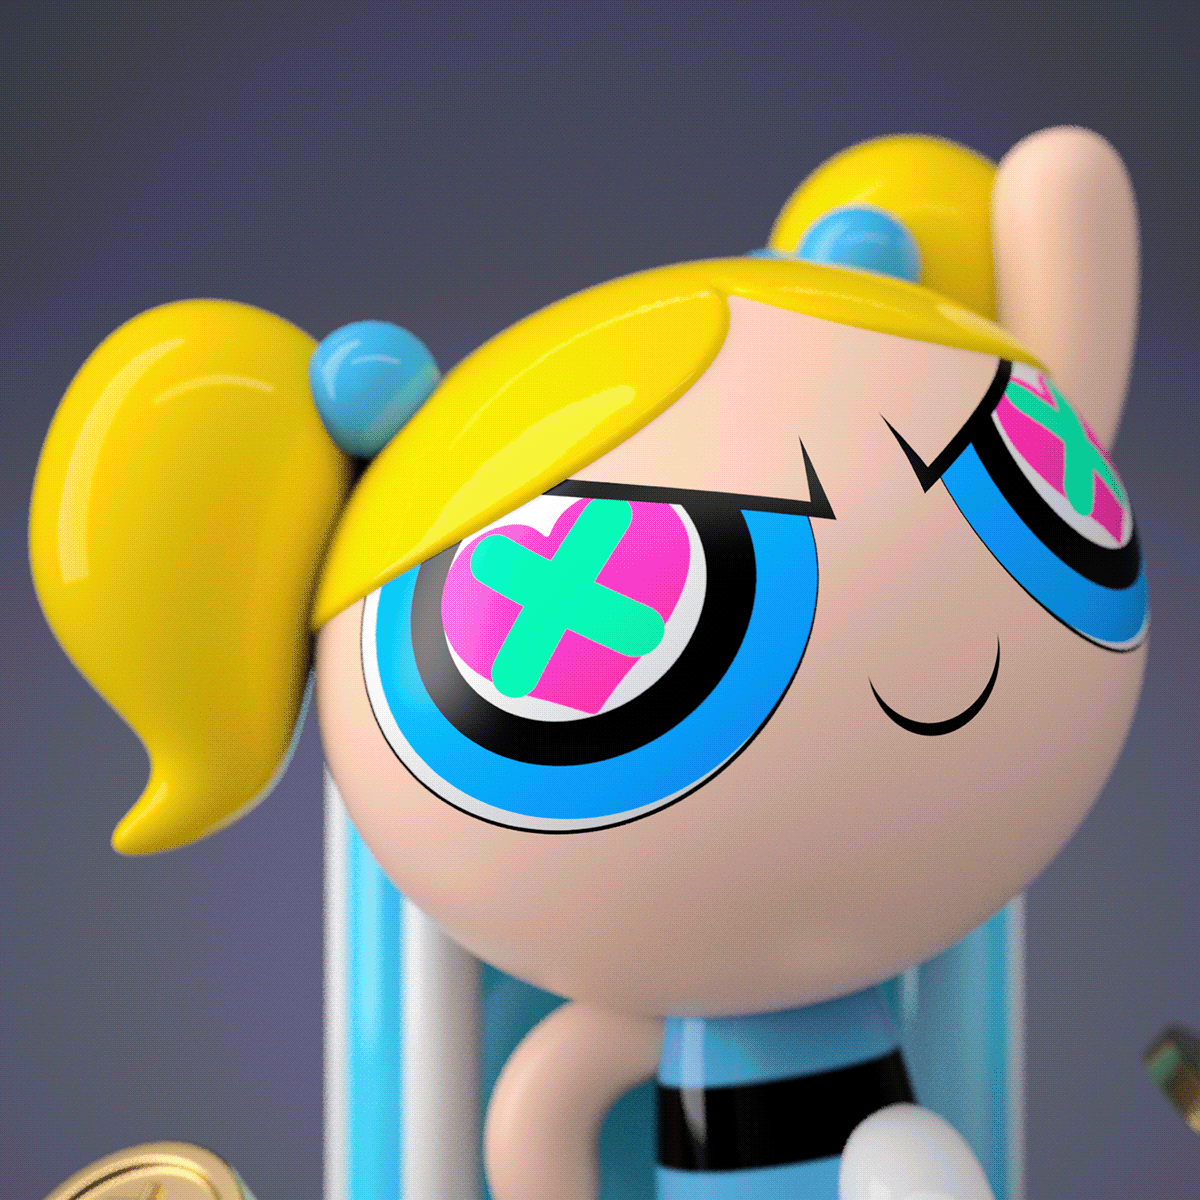 3D 3dmodeling arttoy bitcoin c4d cgiart Character popart powerpuffgirls toy